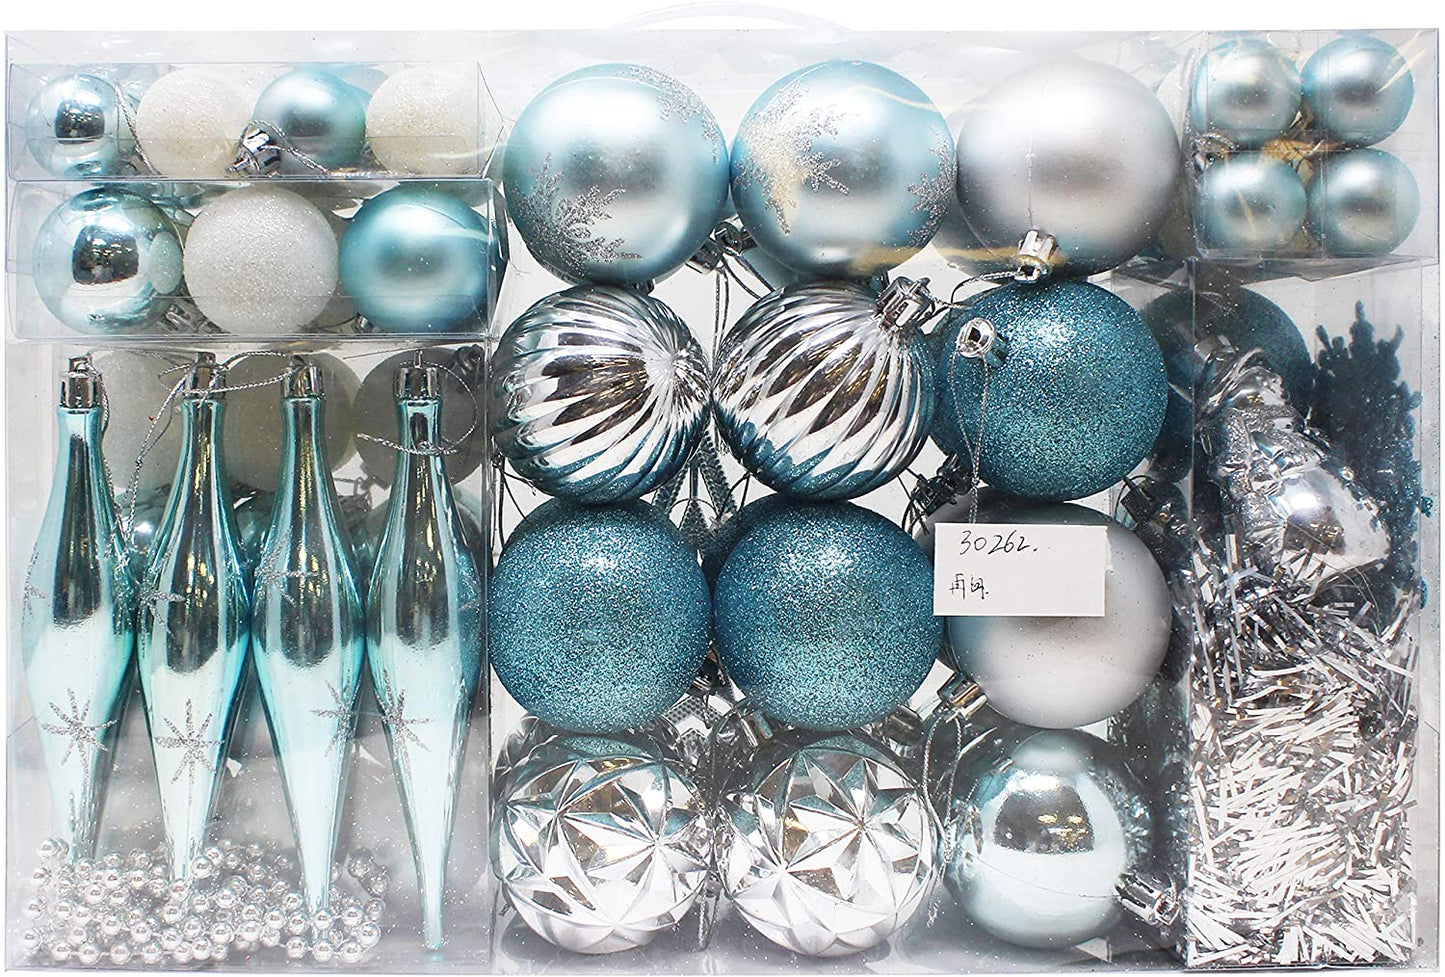 110 Pcs Blue, White, and Silver Christmas Ornaments